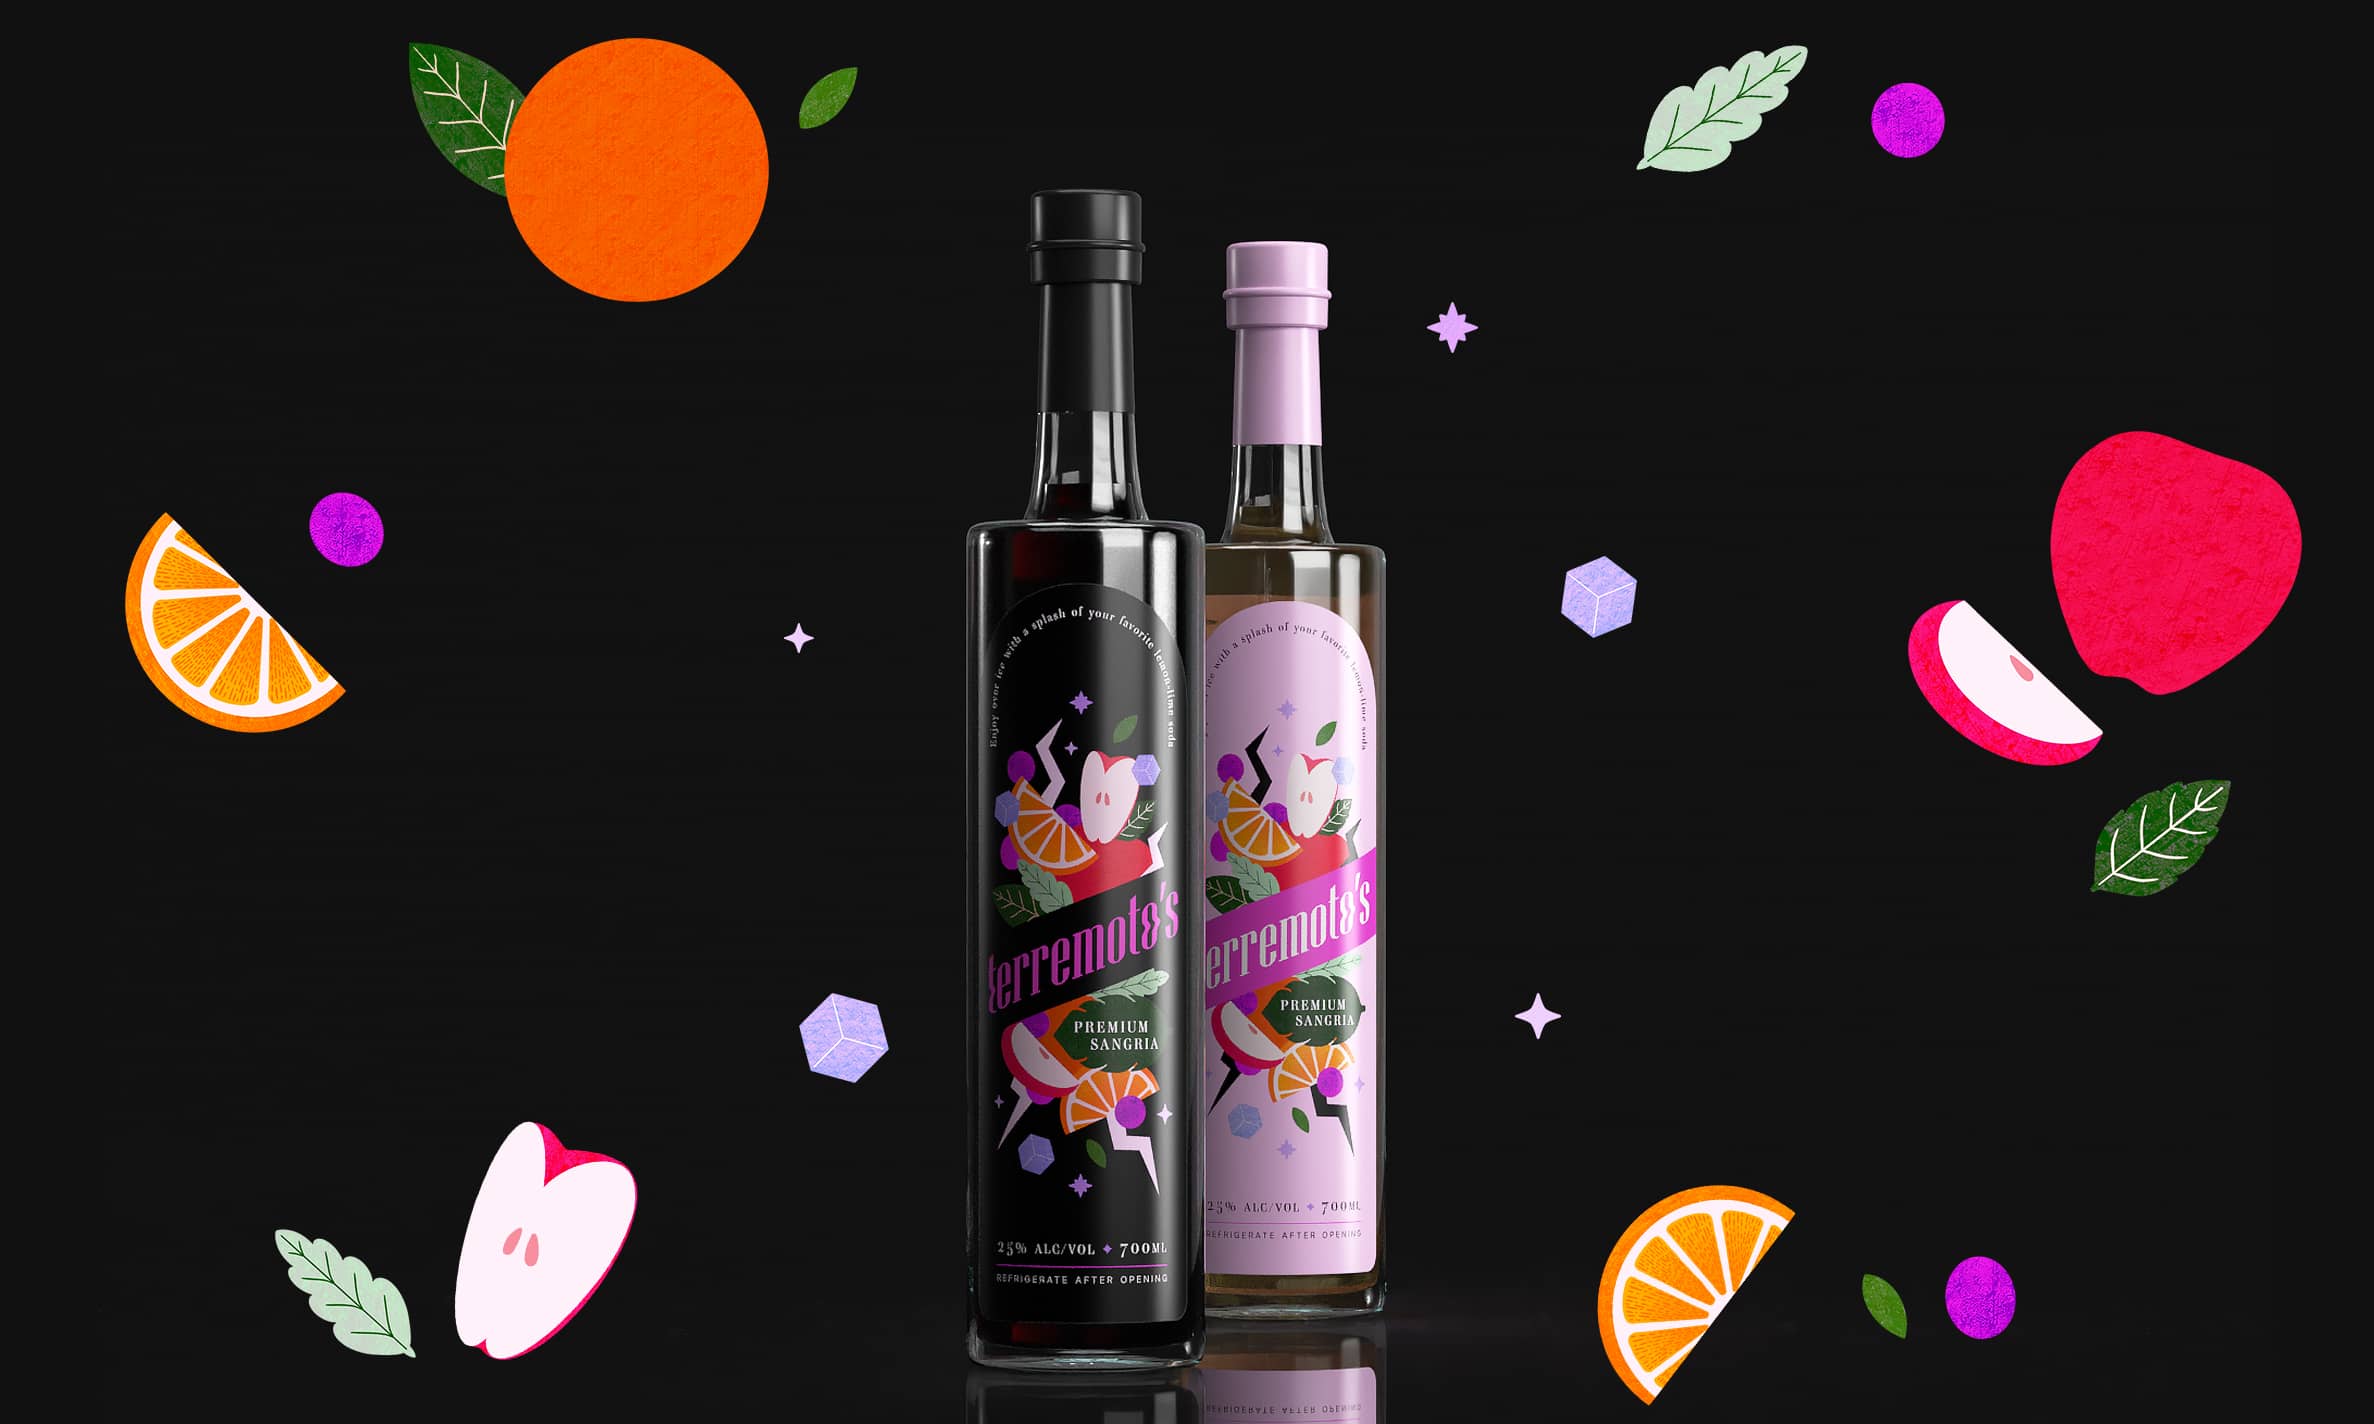 Terremoto’s Premium Sangria Brand Packaging and Illustration Created by Bea Design